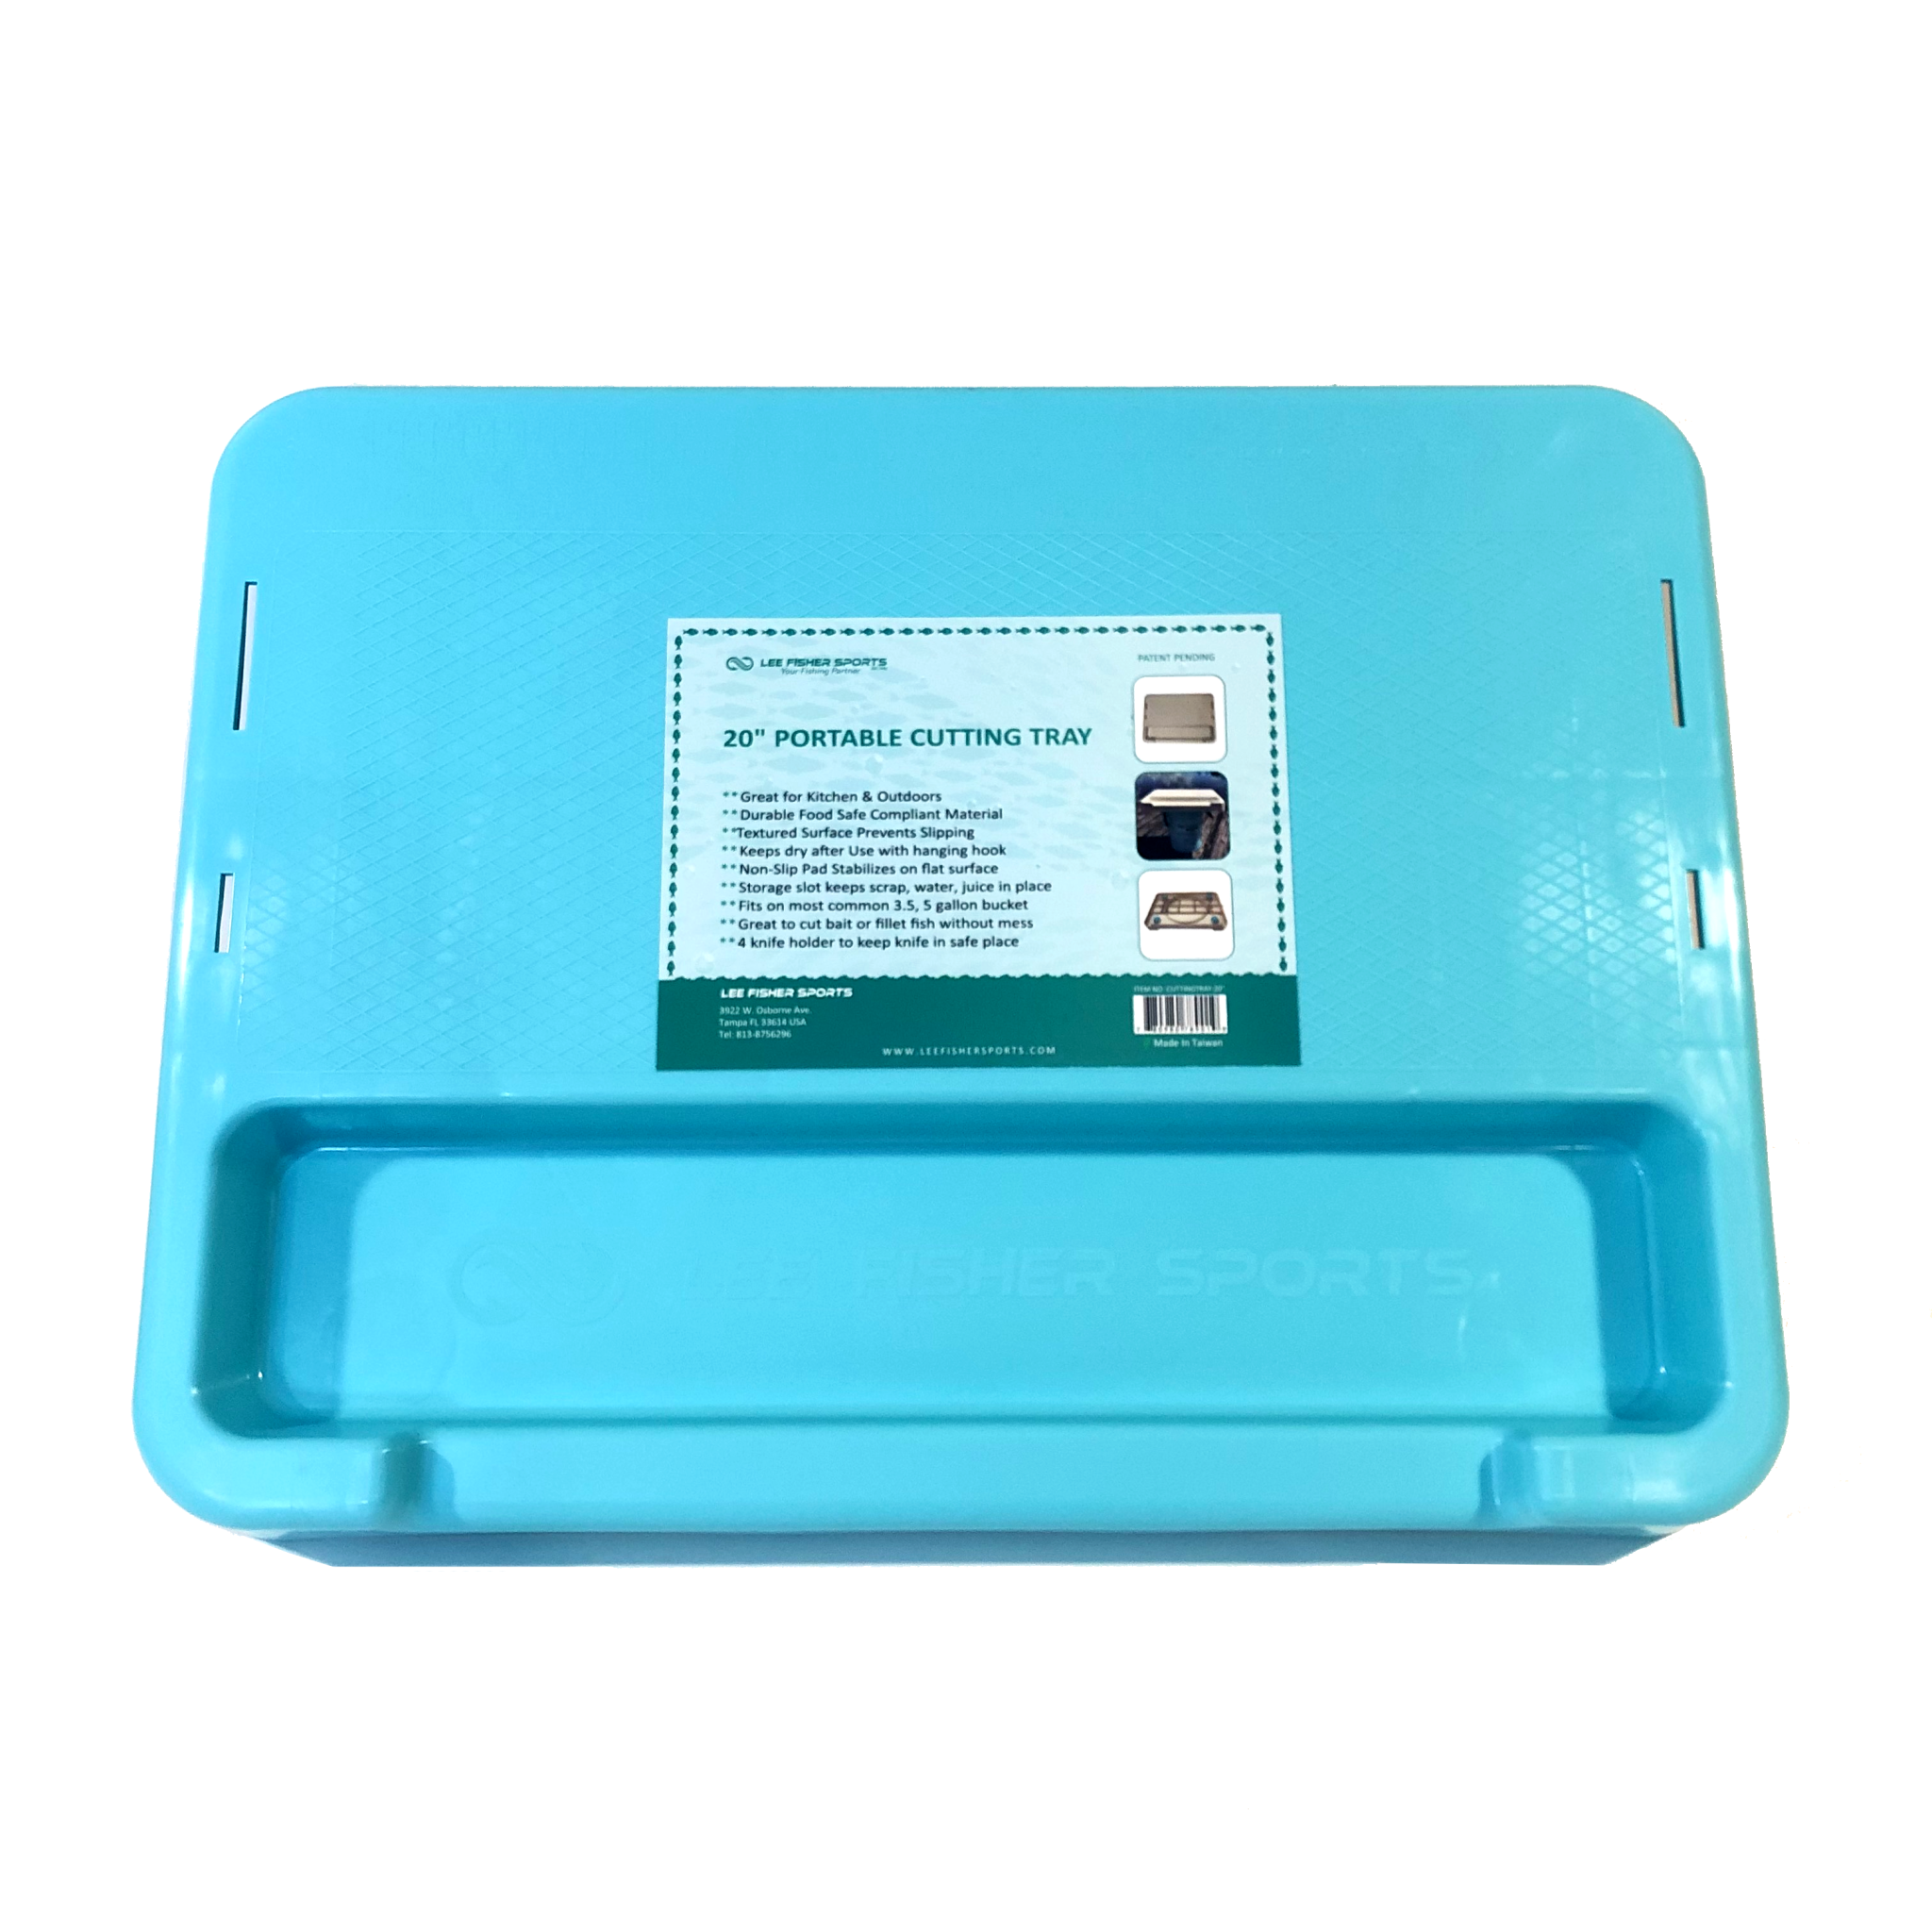 Lee Fisher Portable Cutting Tray 20